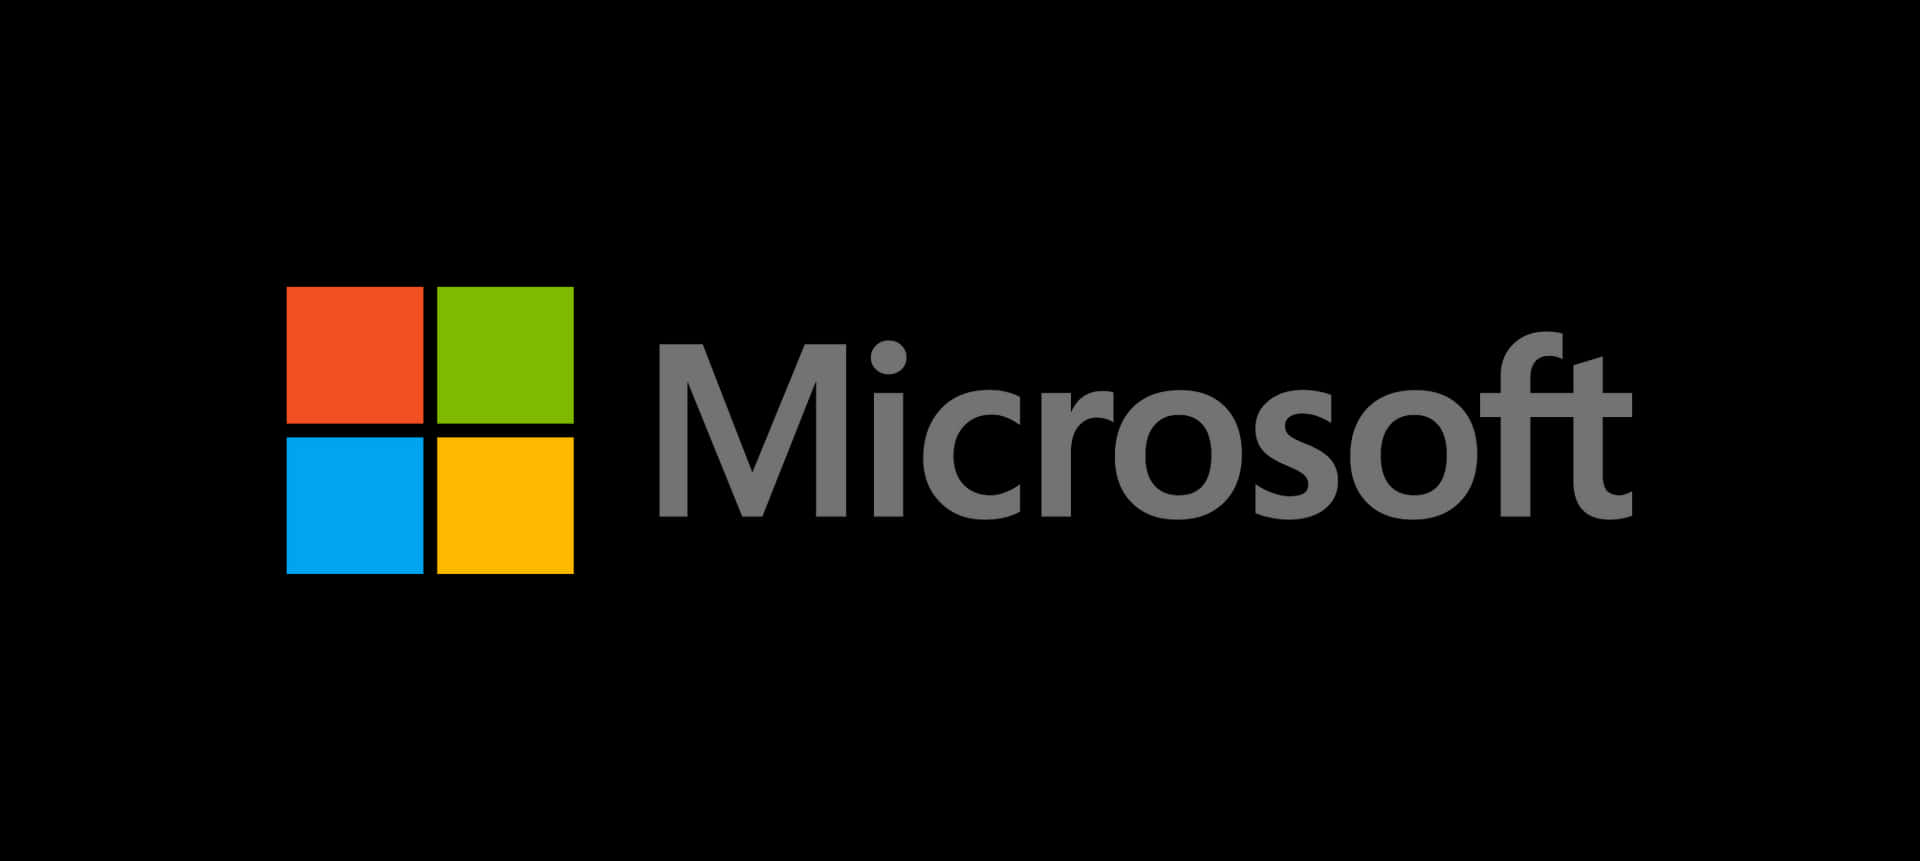 Microsoft Logo Highlighting Their Continuous Search For Innovation